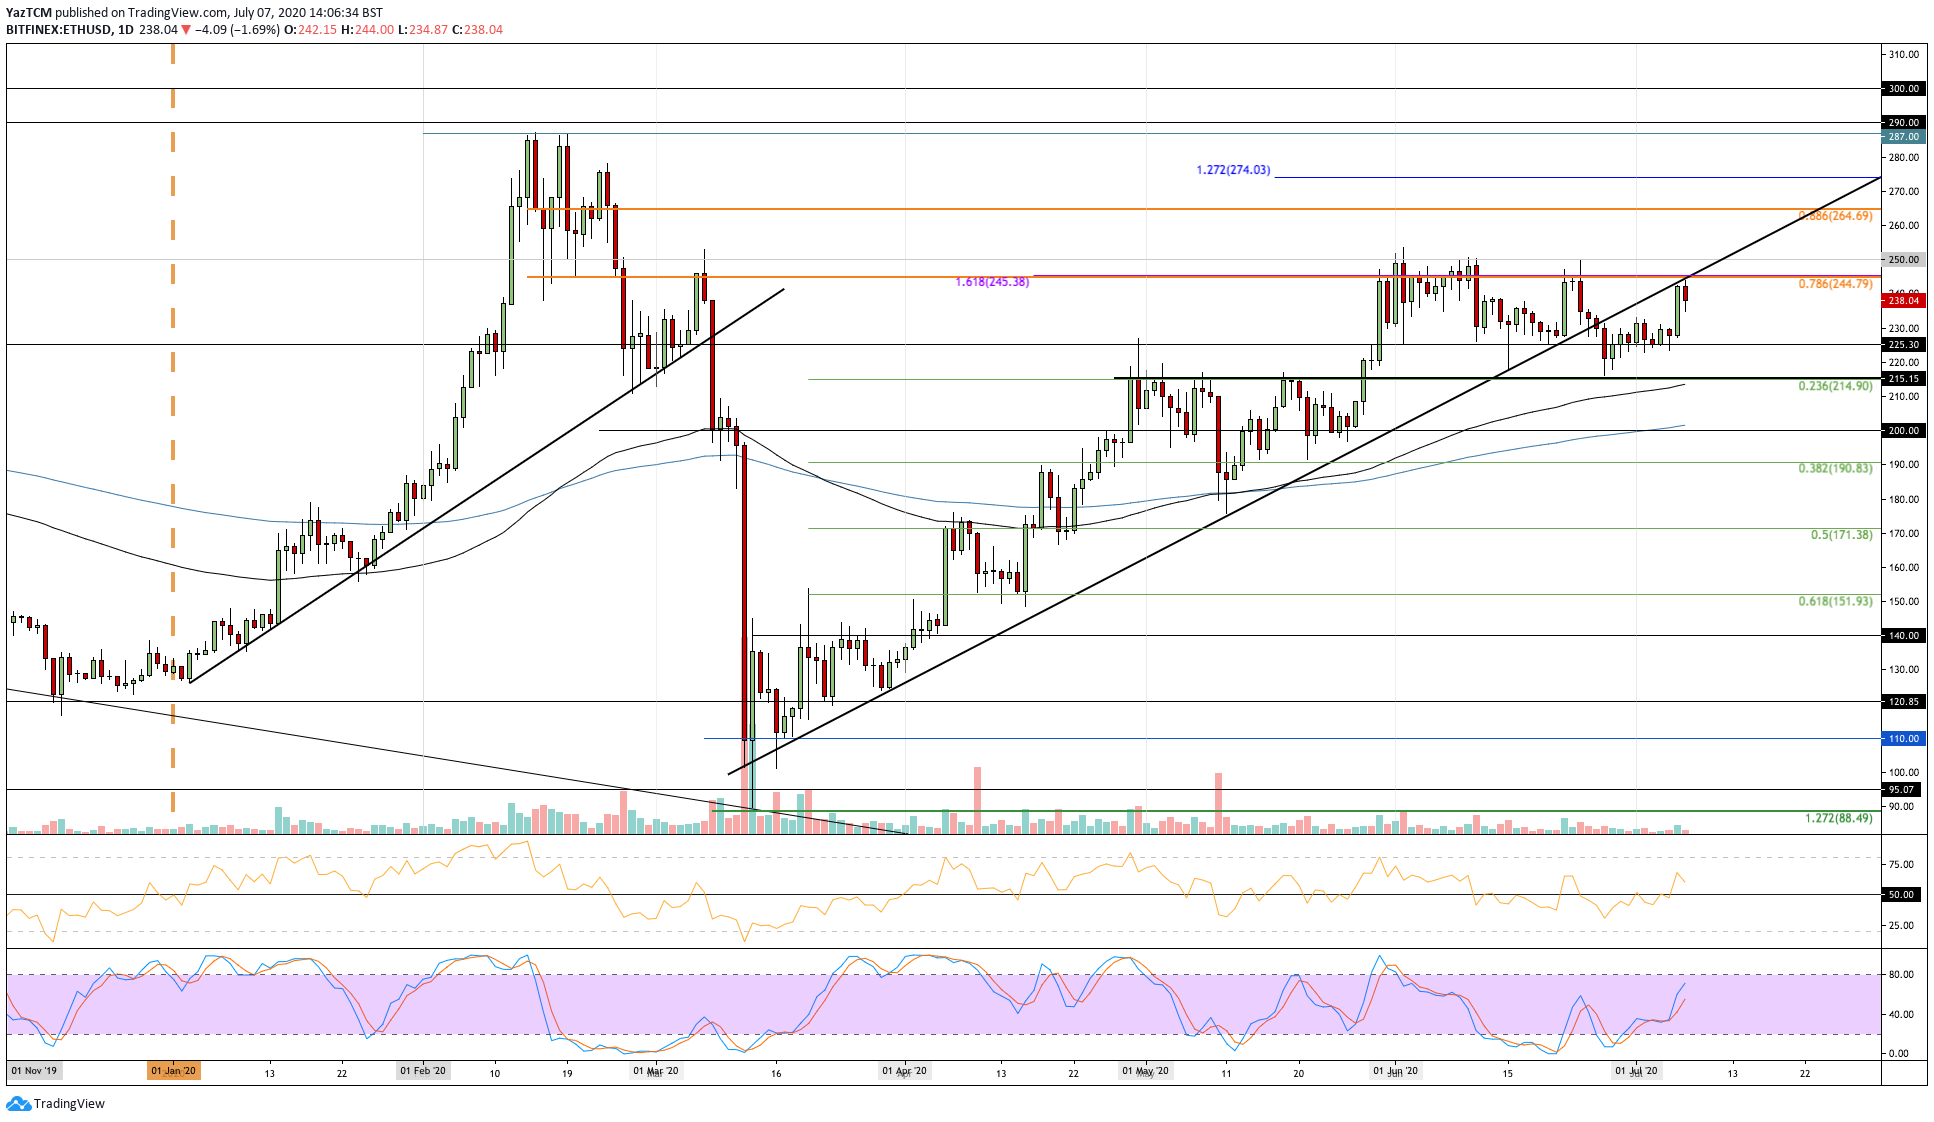 Ethereum Price Analysis: ETH Bulls Back in Business But Will $250 Finally Fall?